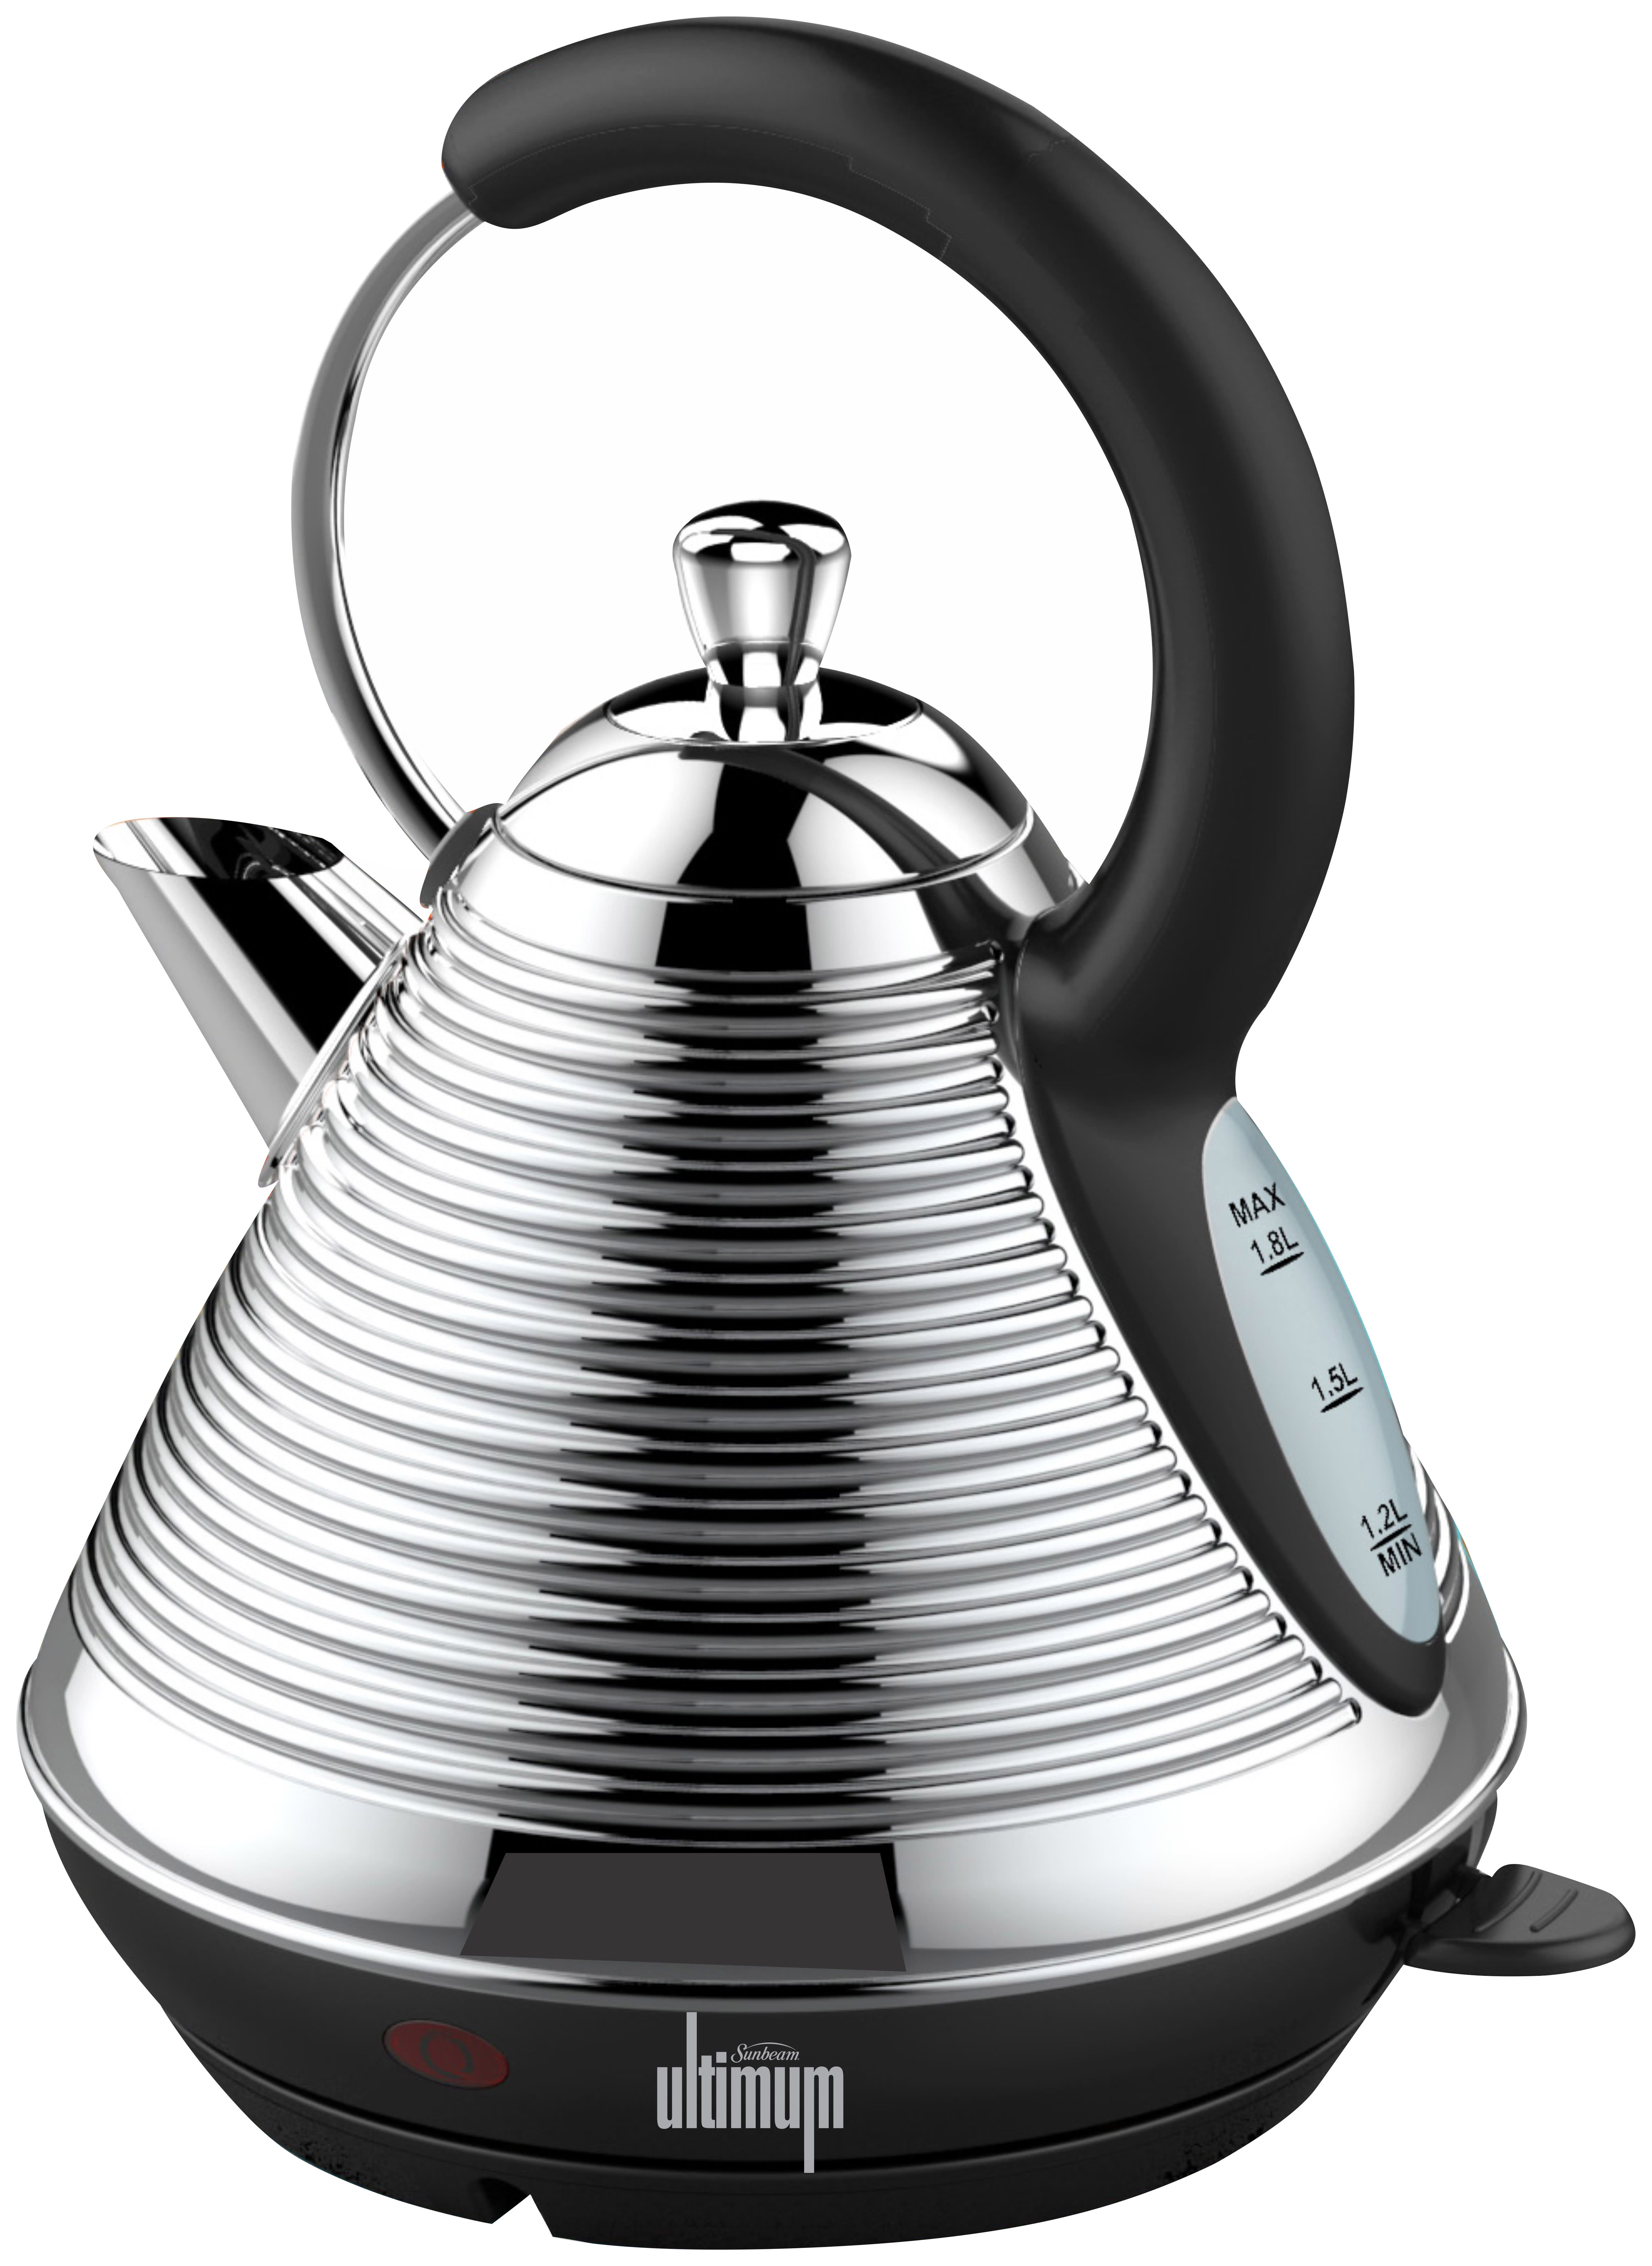 Sunbeam Ultimum - 1.8 Litre Pyramid Kettle for sale with Makro Outlet and bidorbuy